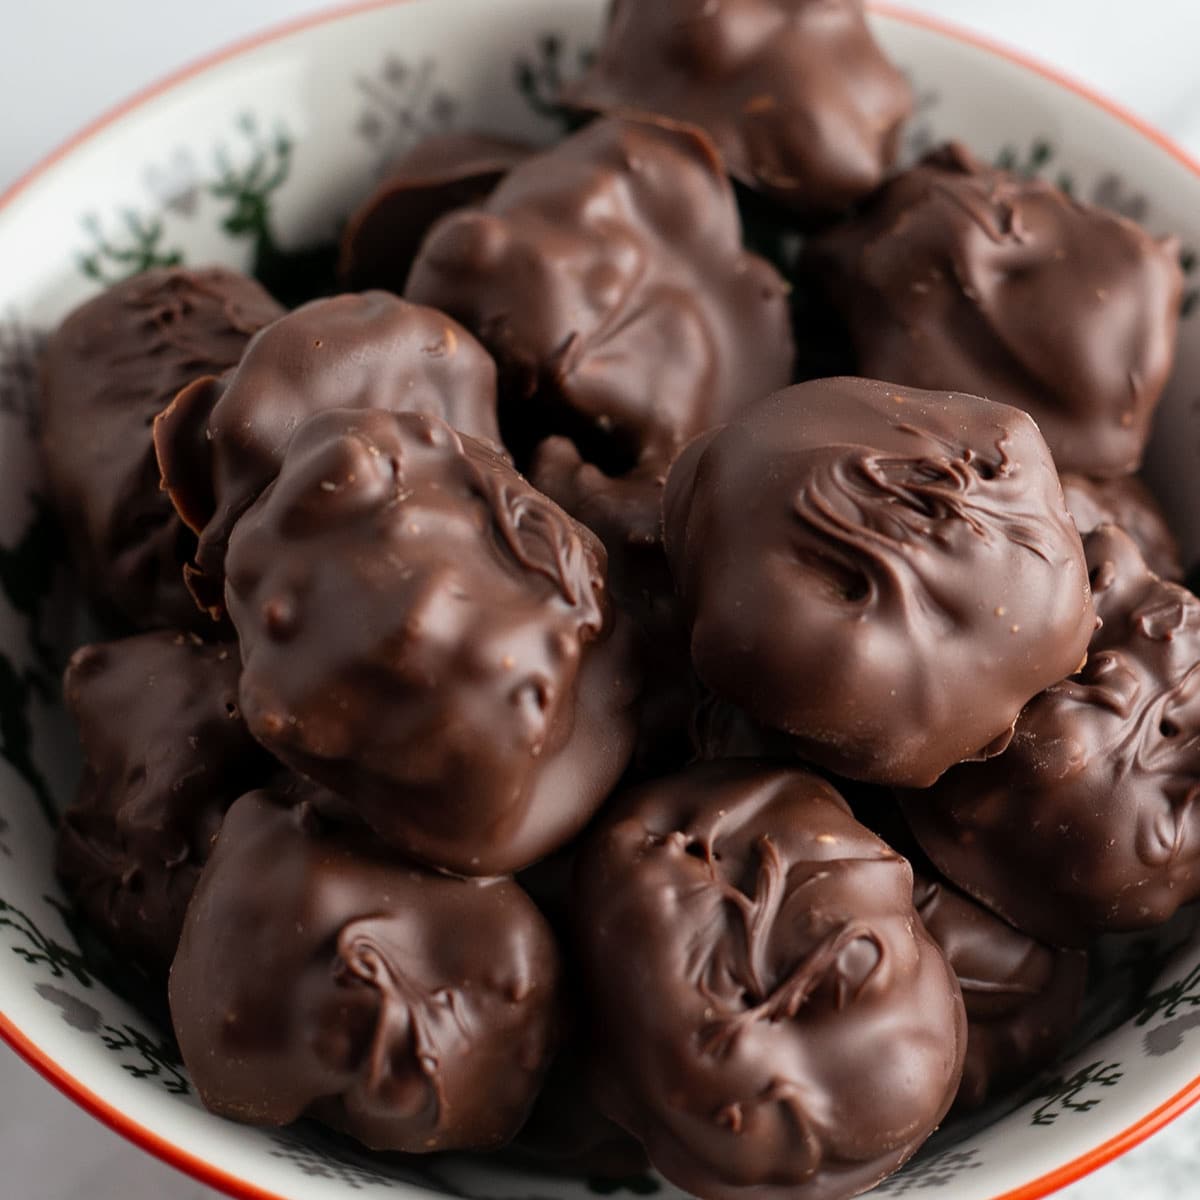 Best chocolate billionaires candies recipe with crucnhy caramel filling and rich chocolate coating.